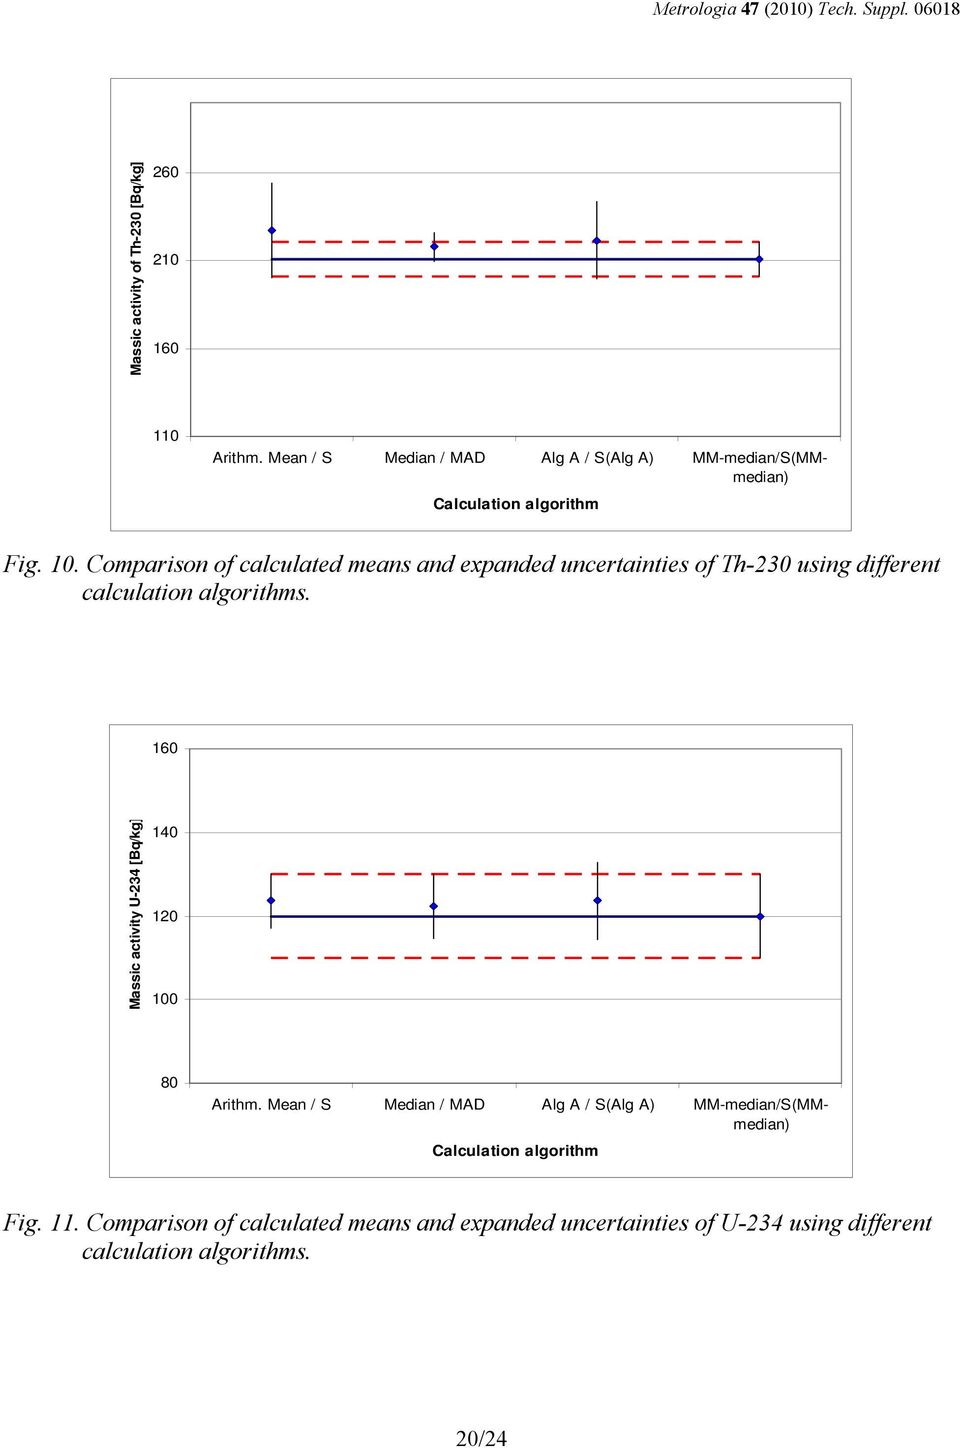 Comparison of calculated means and expanded uncertainties of Th-230 using different calculation algorithms.